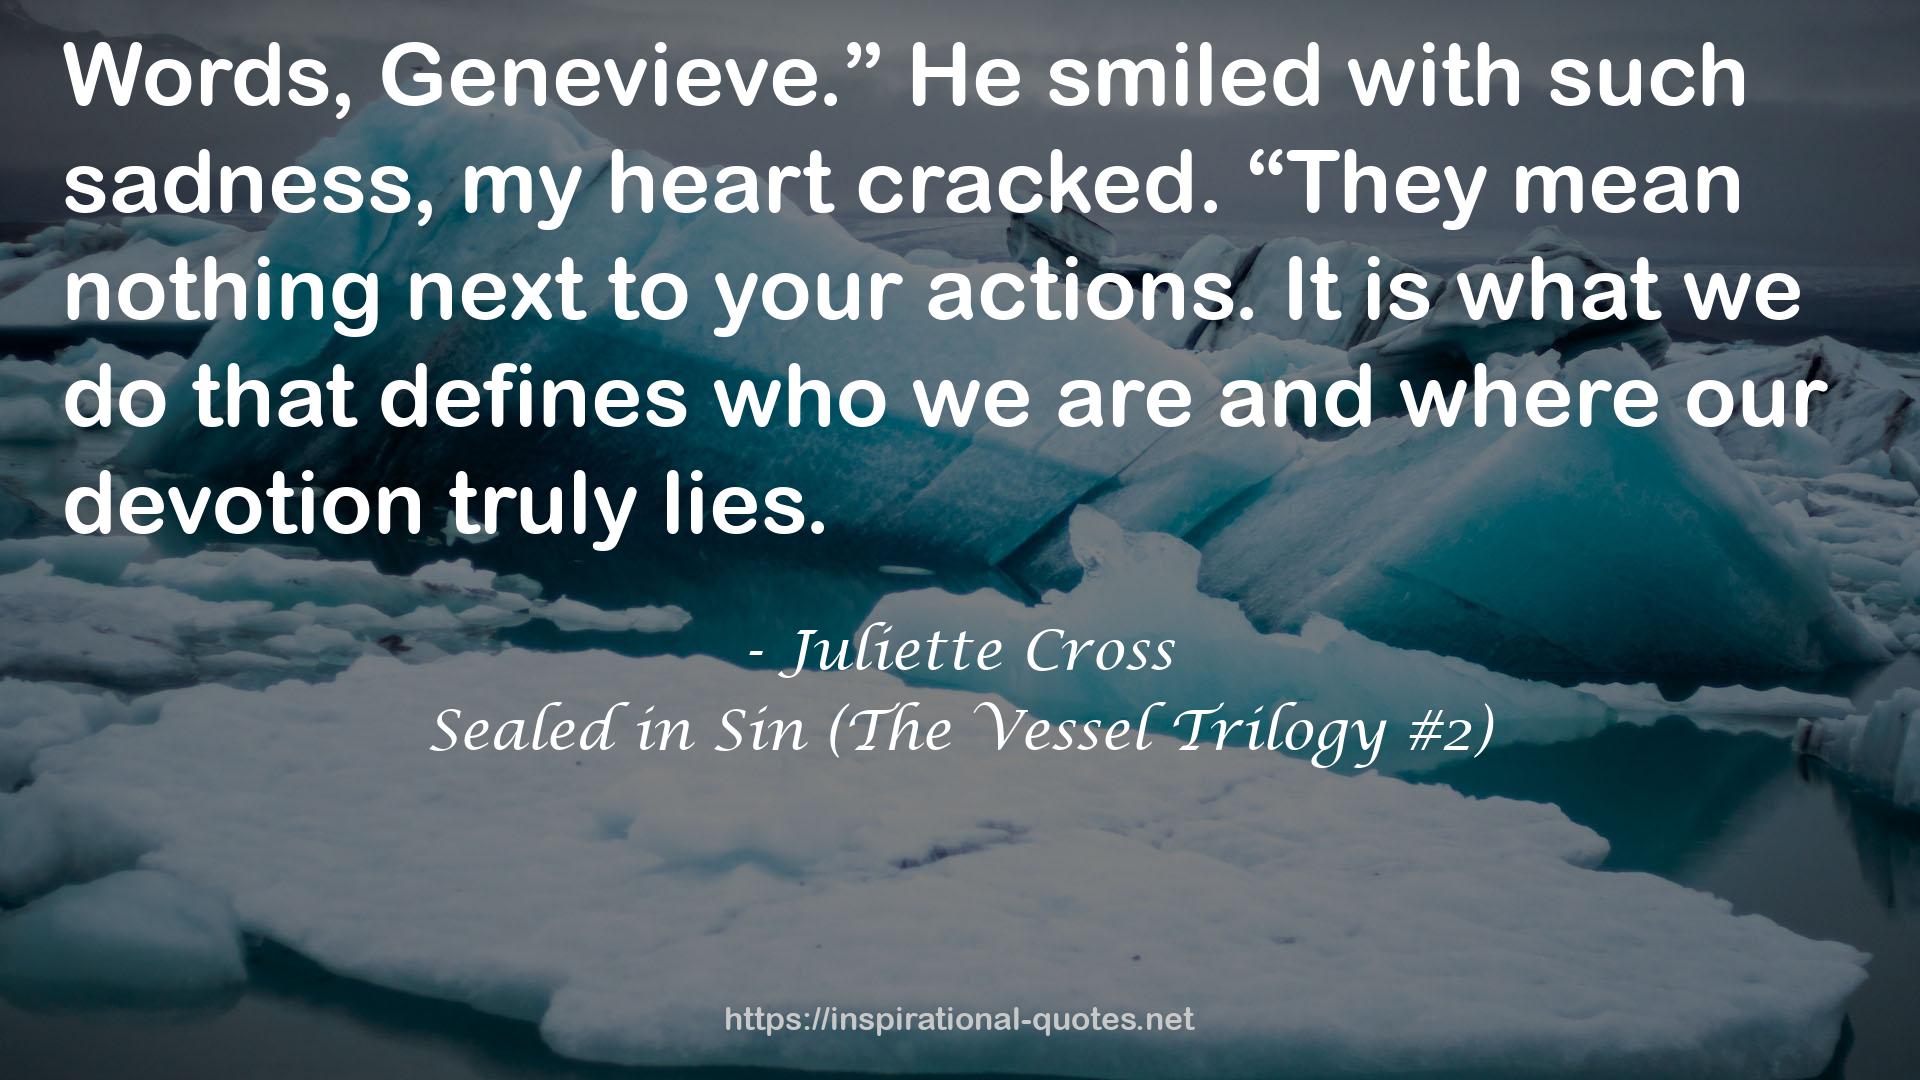 Sealed in Sin (The Vessel Trilogy #2) QUOTES